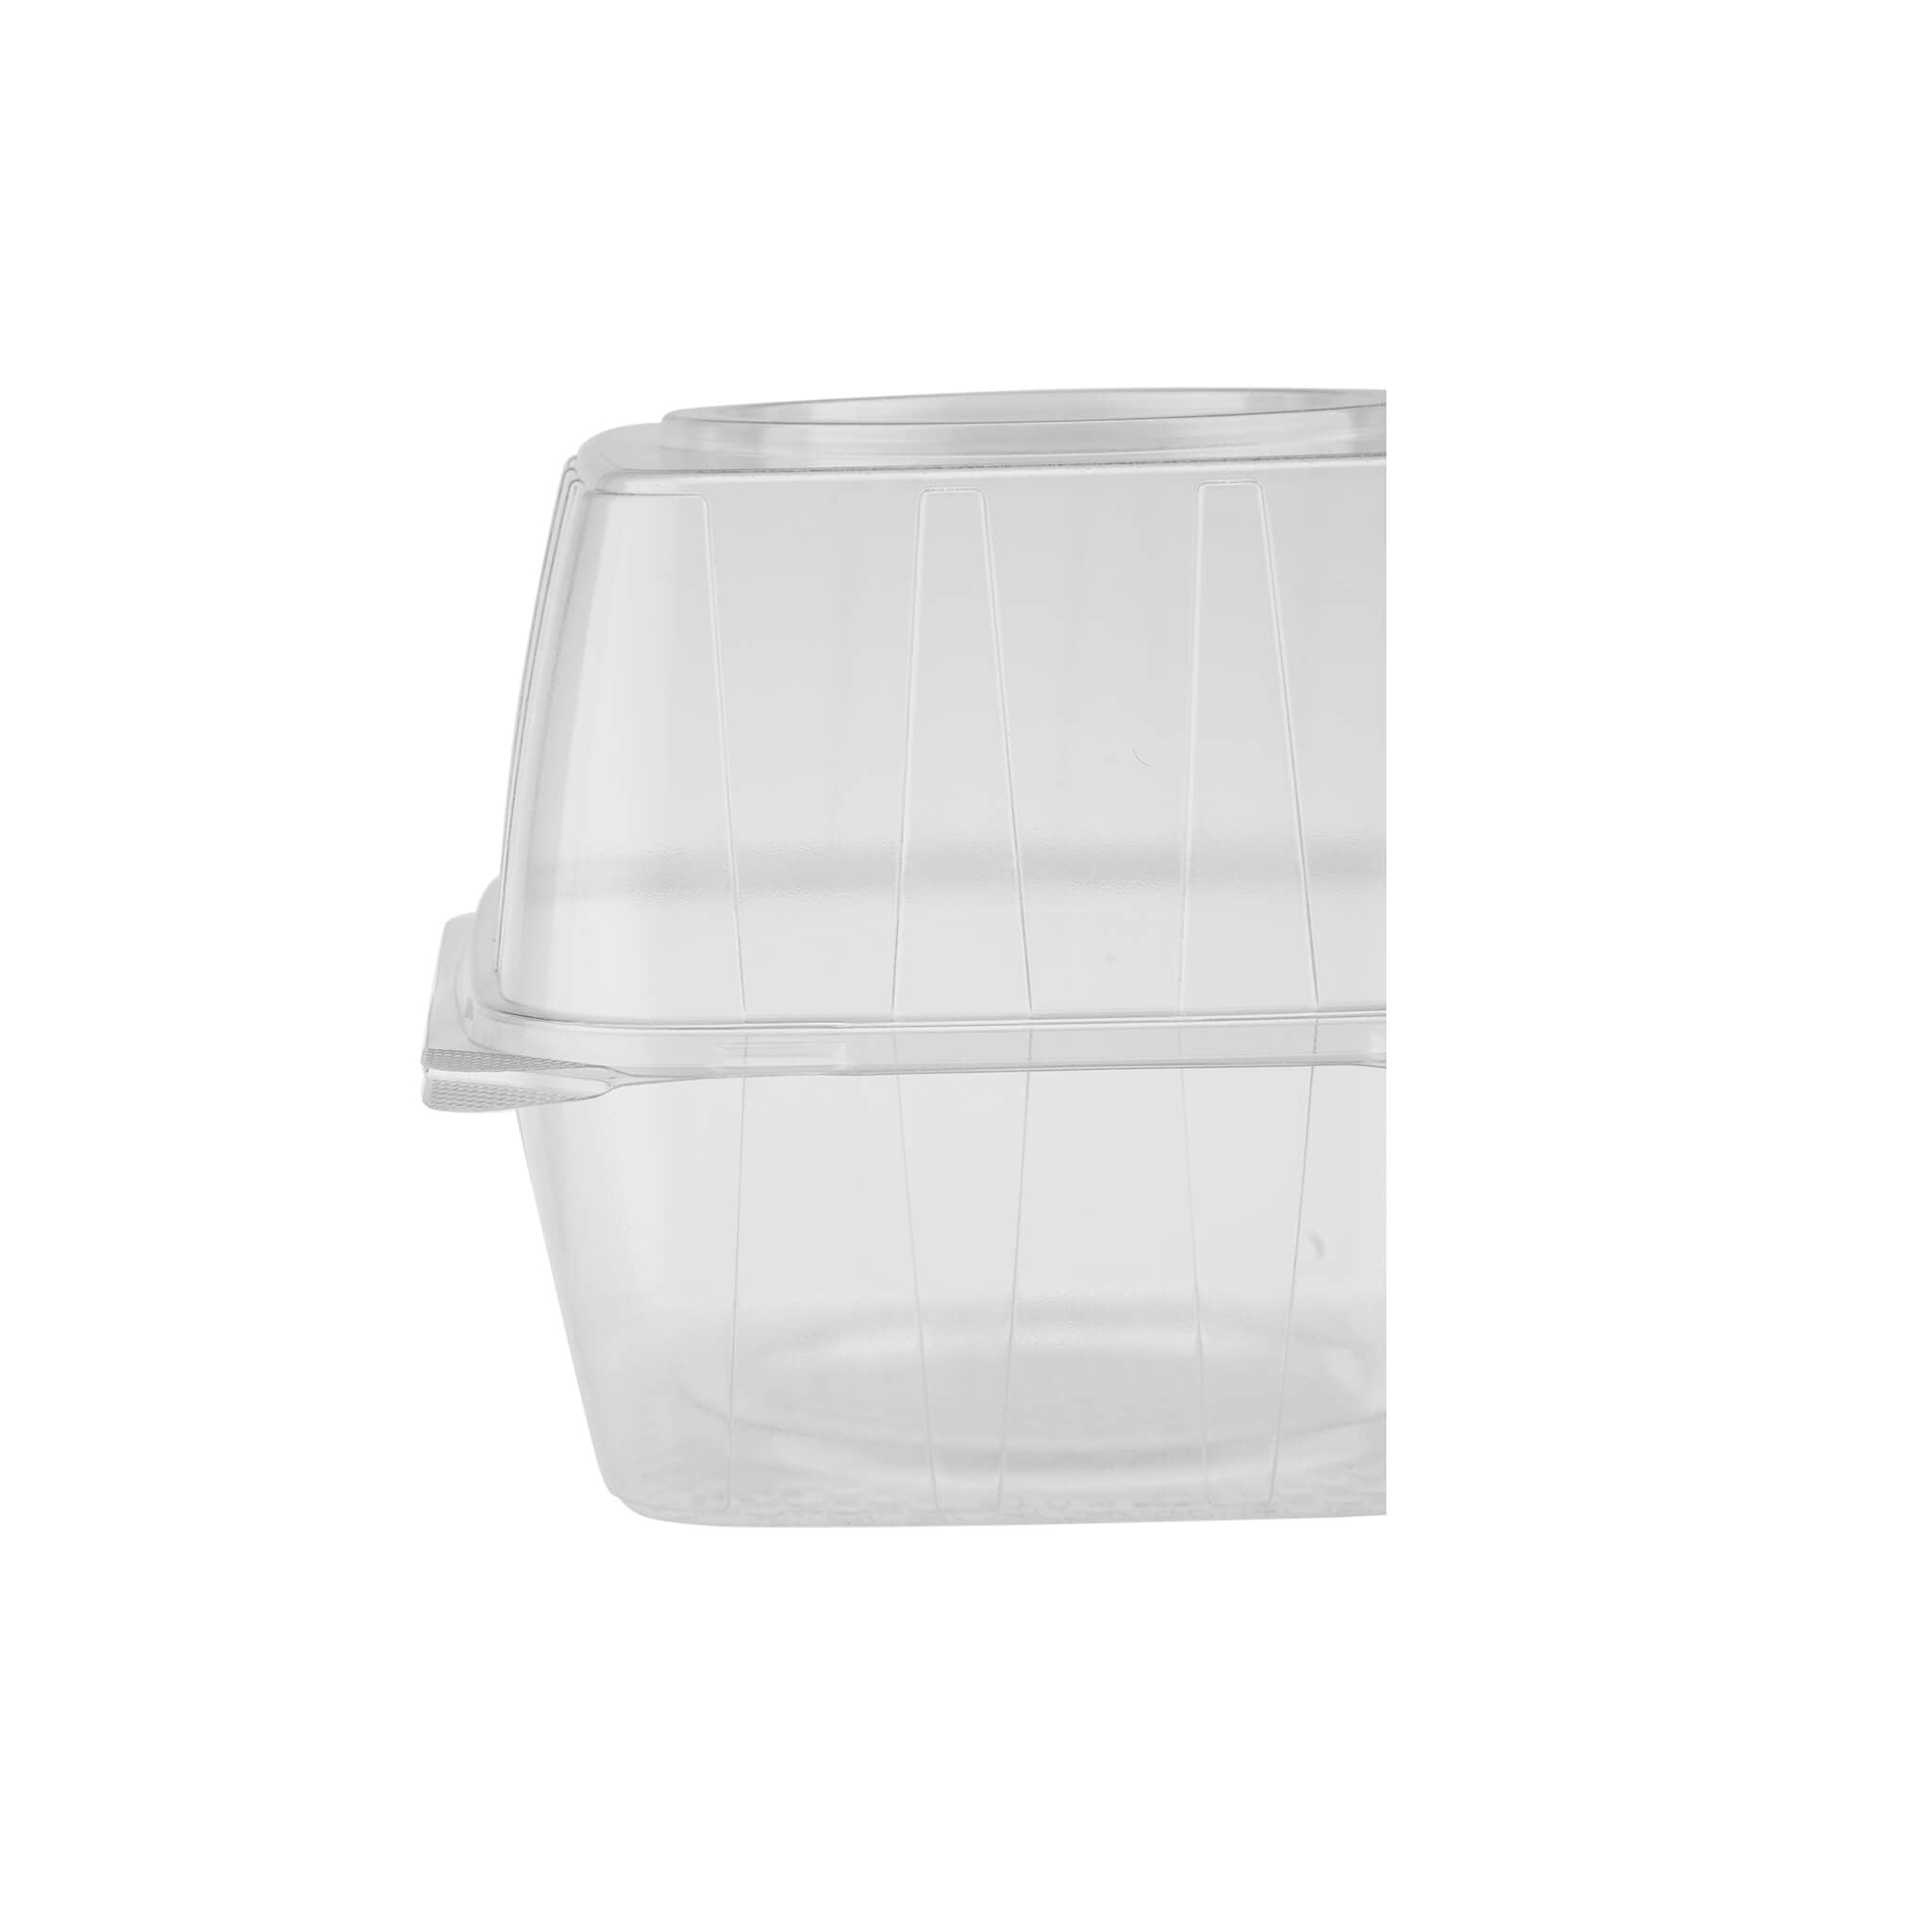 Wholesale small hinged tins for Robust and Clean Sanitation 